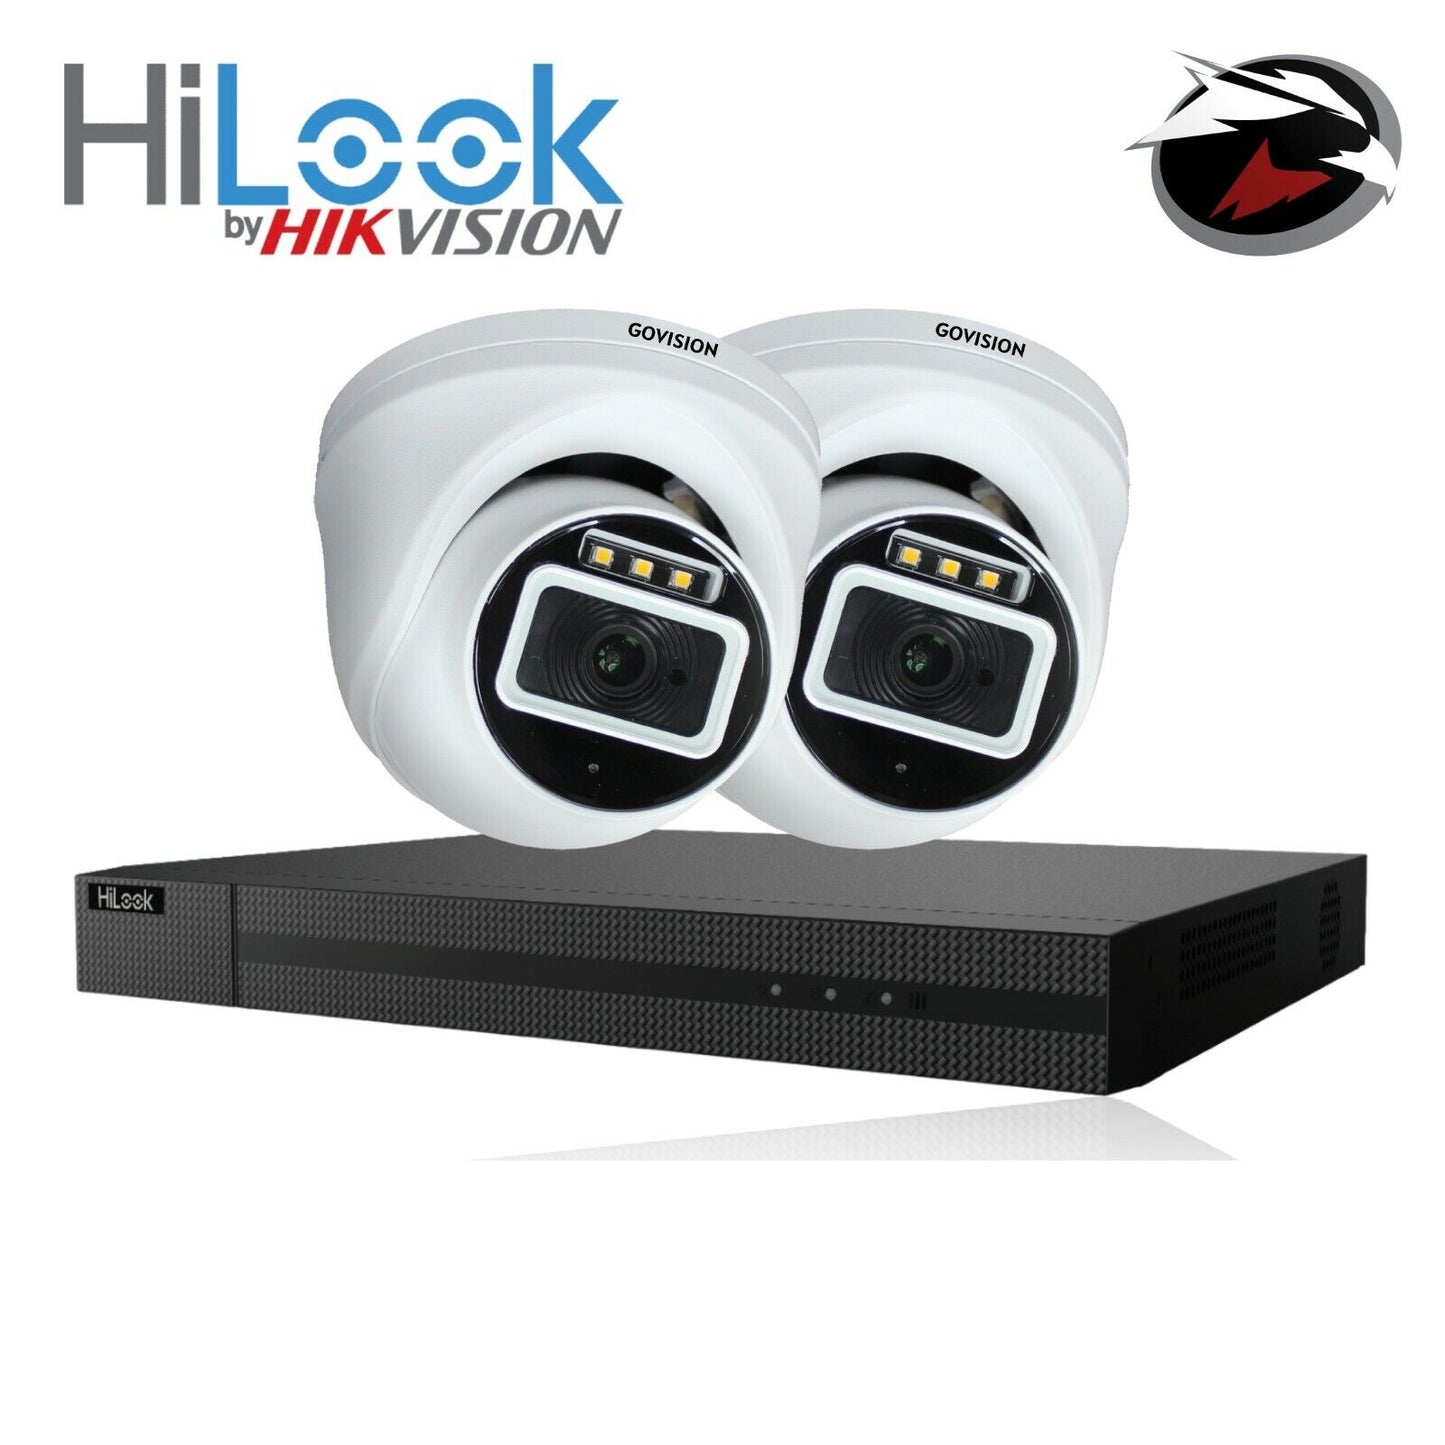 HIKVISION CCTV HD 5MP COLORFUL NIGHT & DAY OUTDOOR DVR HOME SECURITY SYSTEM KIT 4CH DVR 2x Cameras (white) 1TB HDD